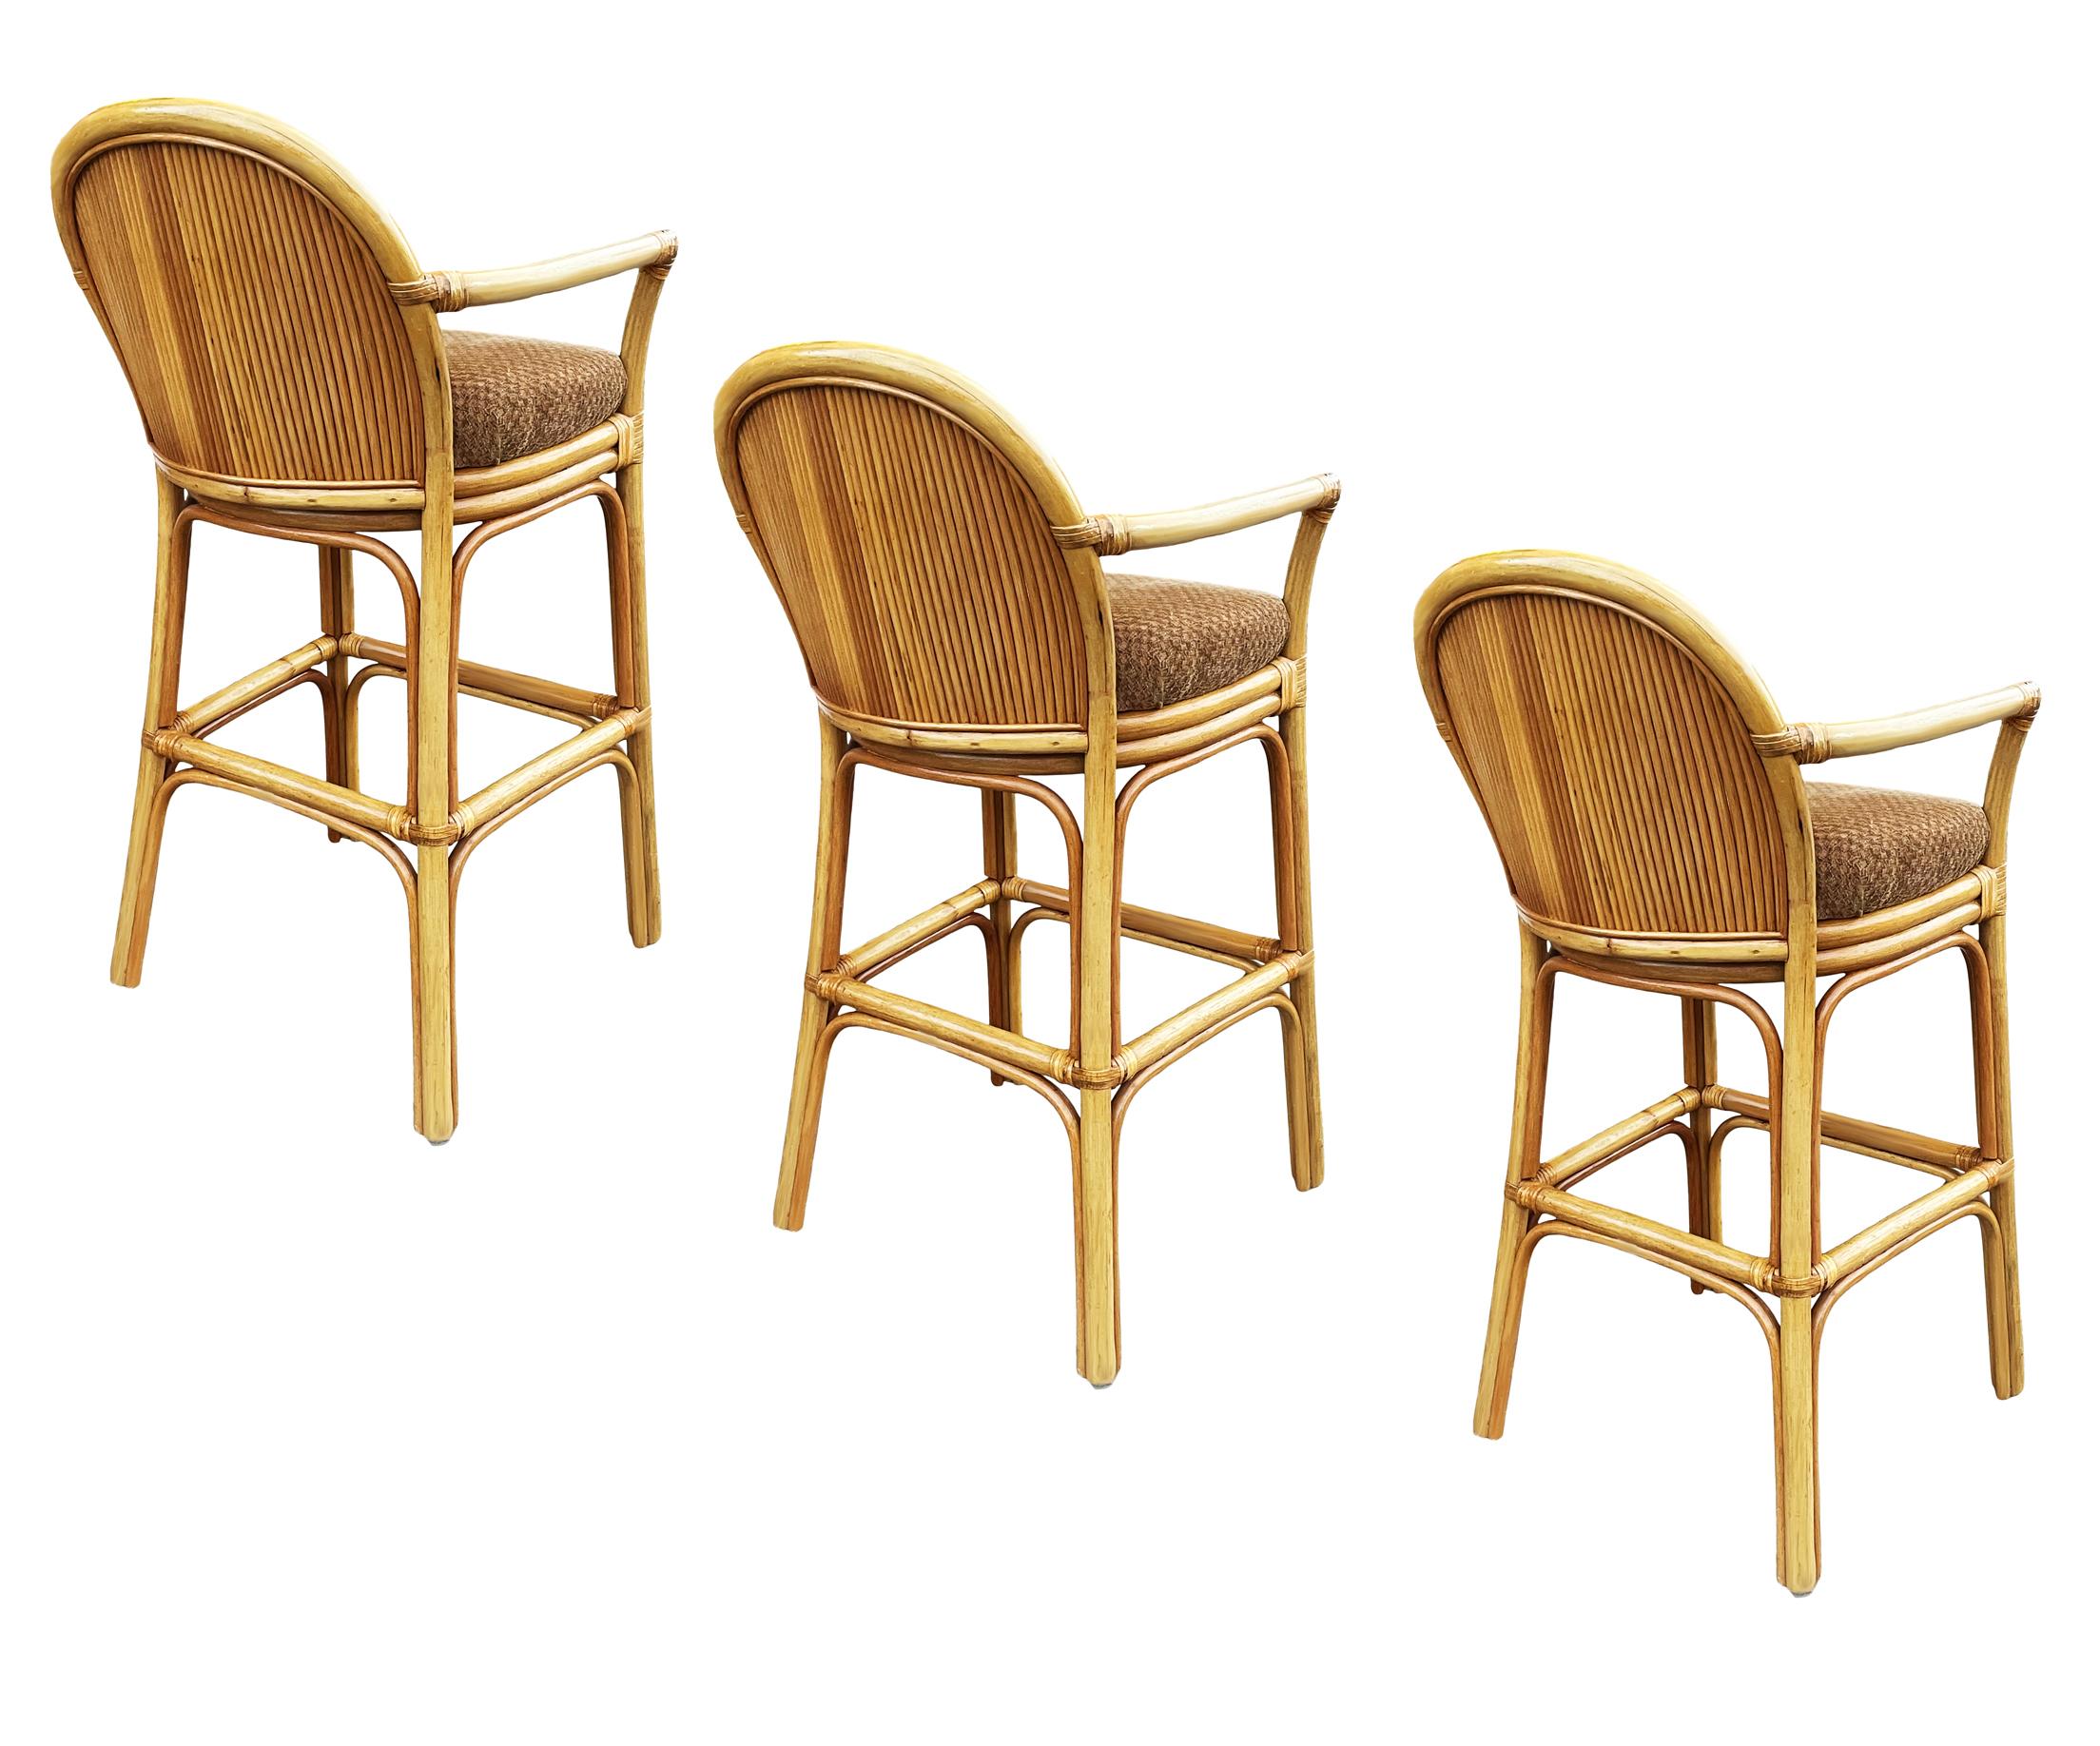 Late 20th Century Set of 3 Matching Mid-Century Modern Rattan or Bamboo Bar Stools For Sale